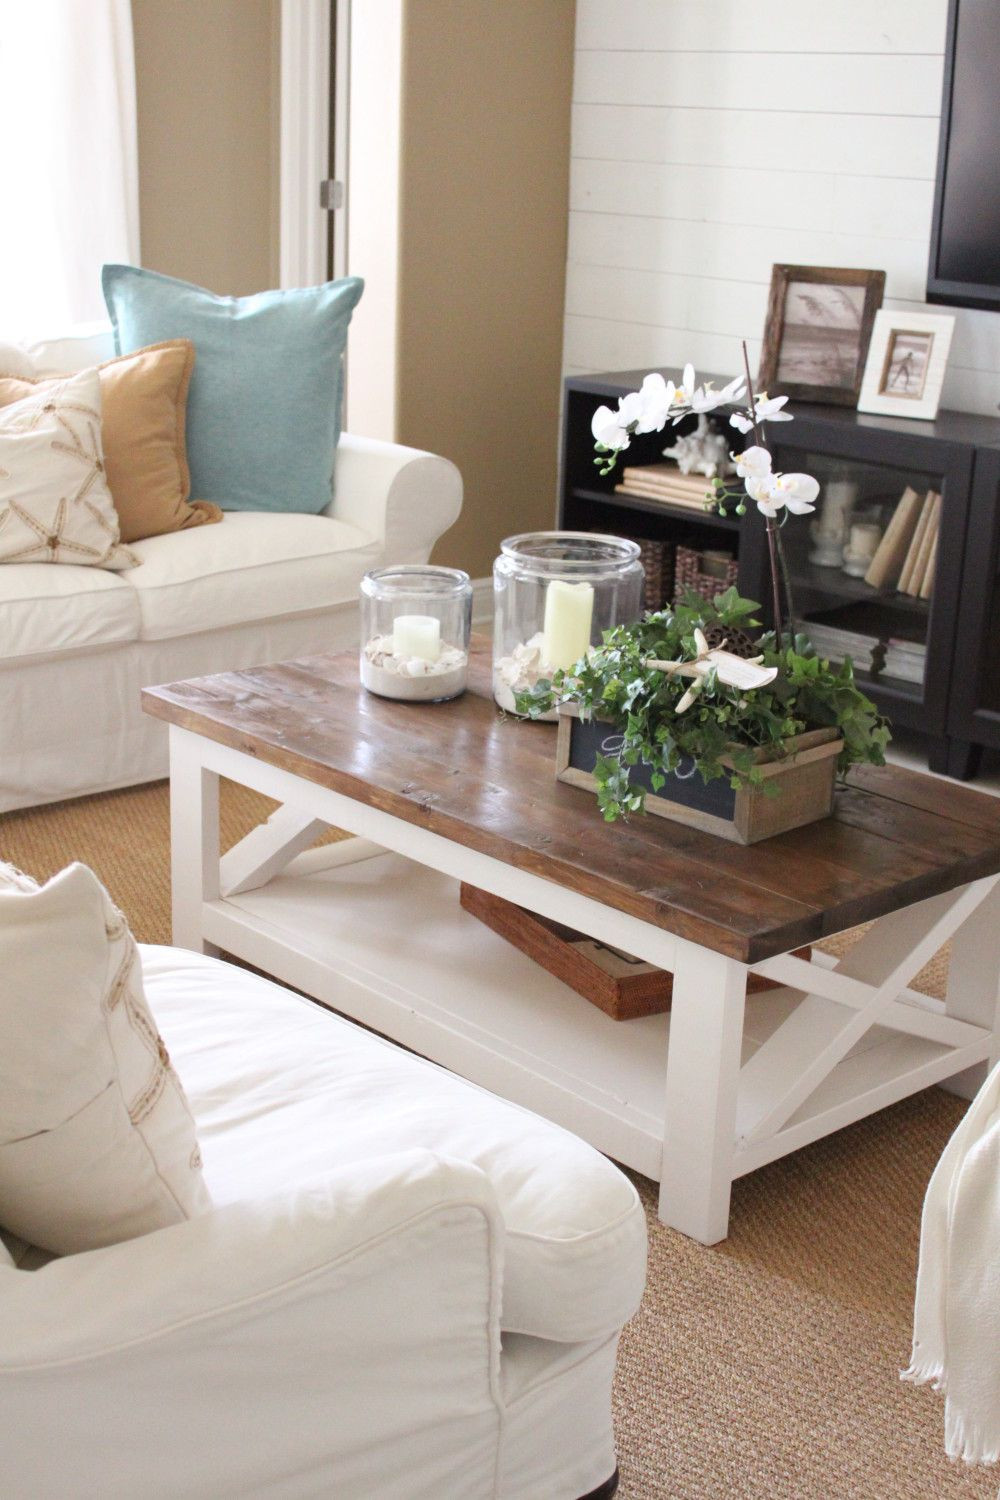 Living Room End Table Decor
 160 Best Coffee Tables Ideas